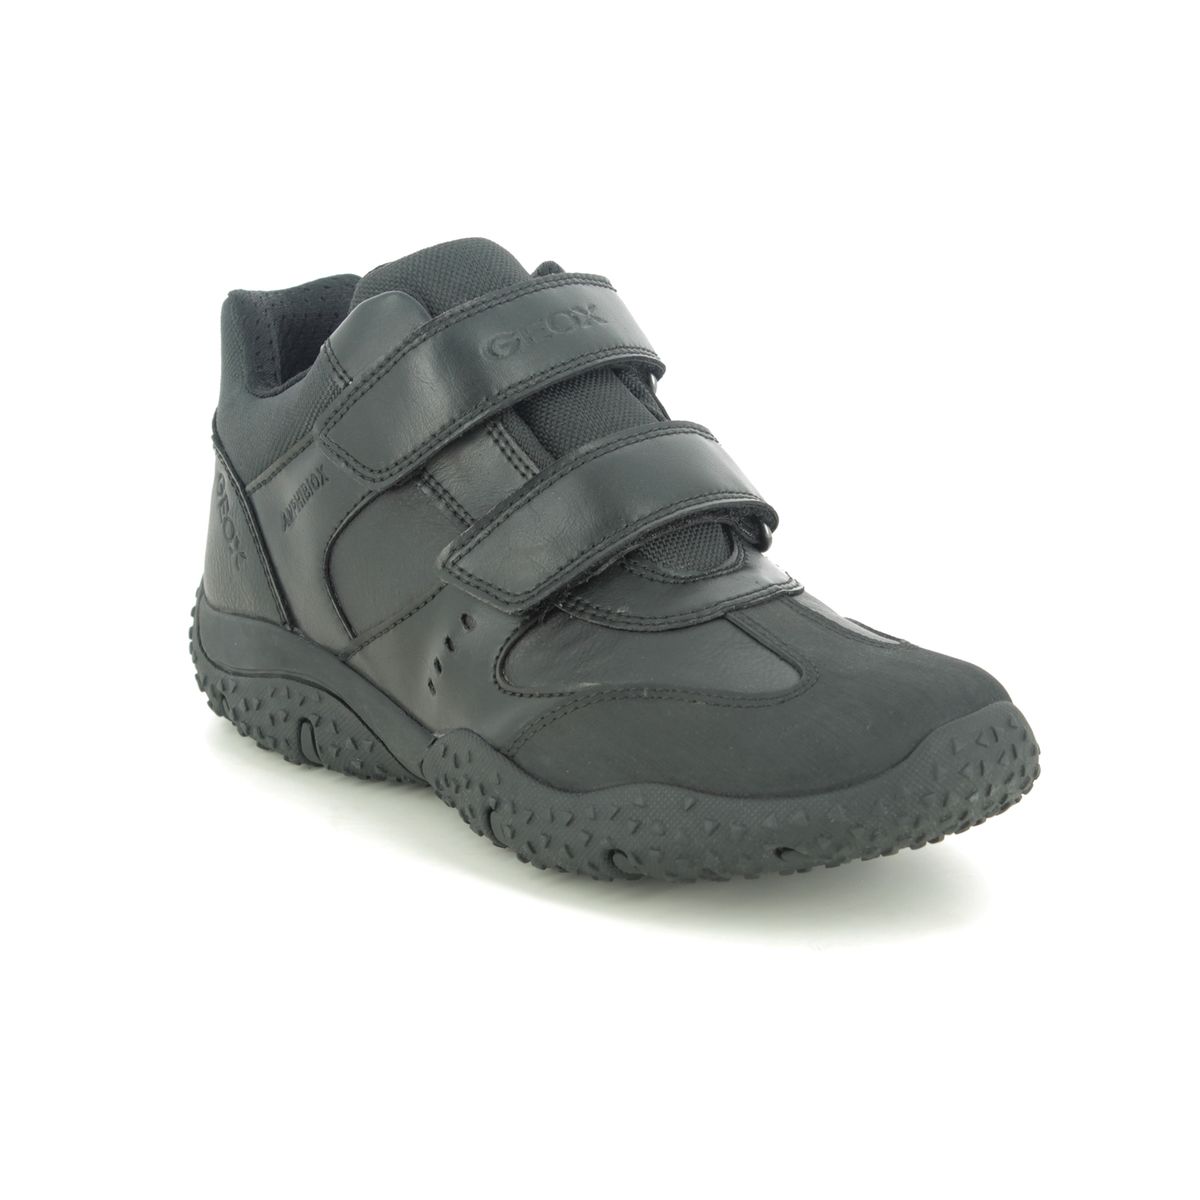 Geox - Baltic Boy Tex (Black Leather) J0442A-C9999 In Size 37 In Plain Black Leather For School For kids